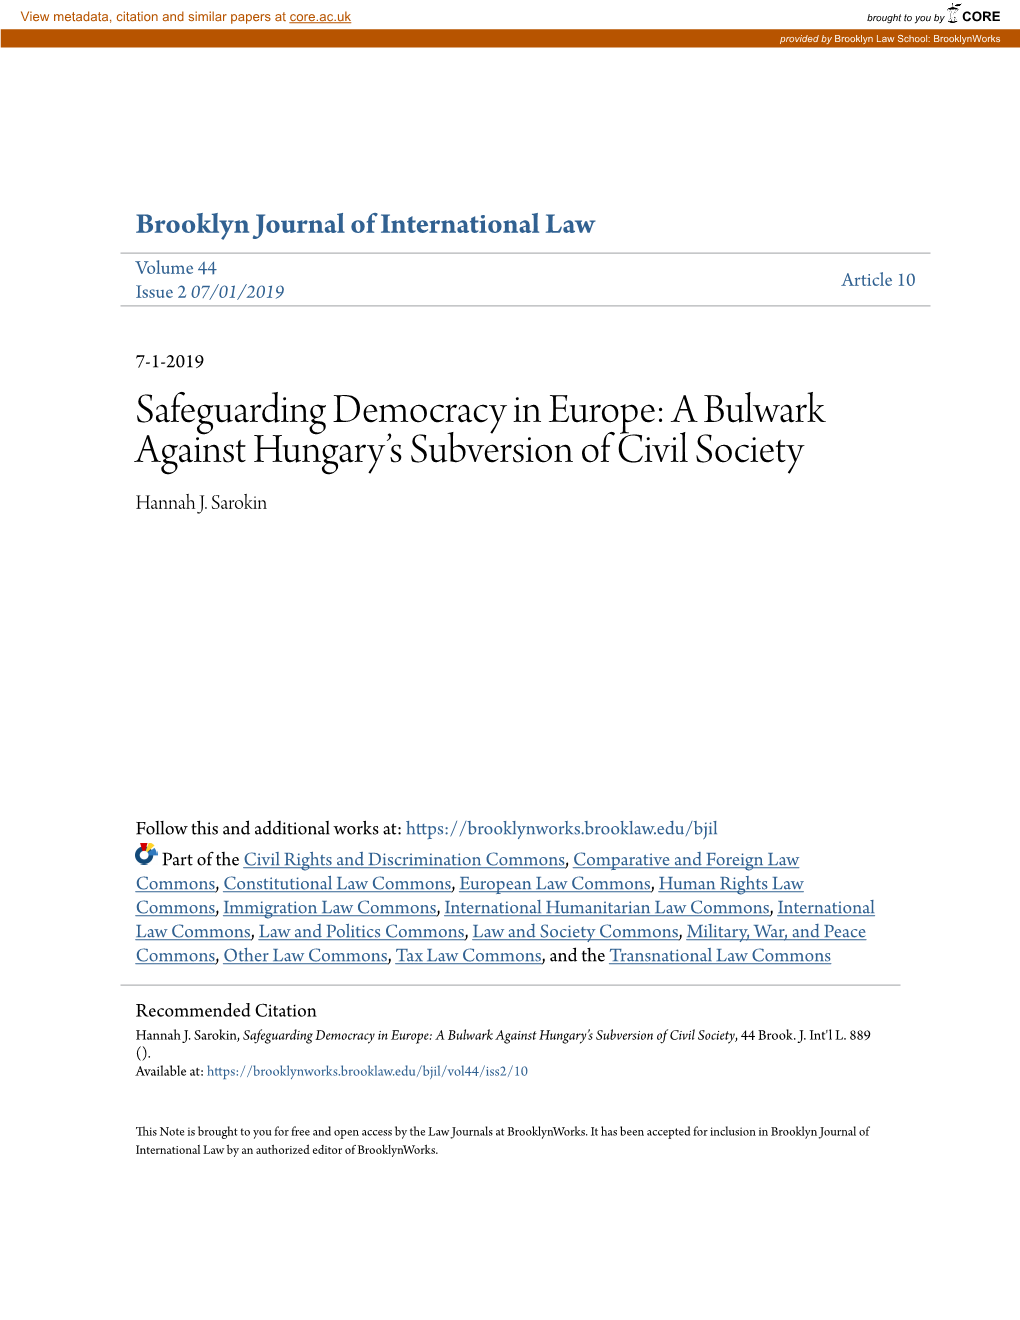 A Bulwark Against Hungary's Subversion of Civil Society